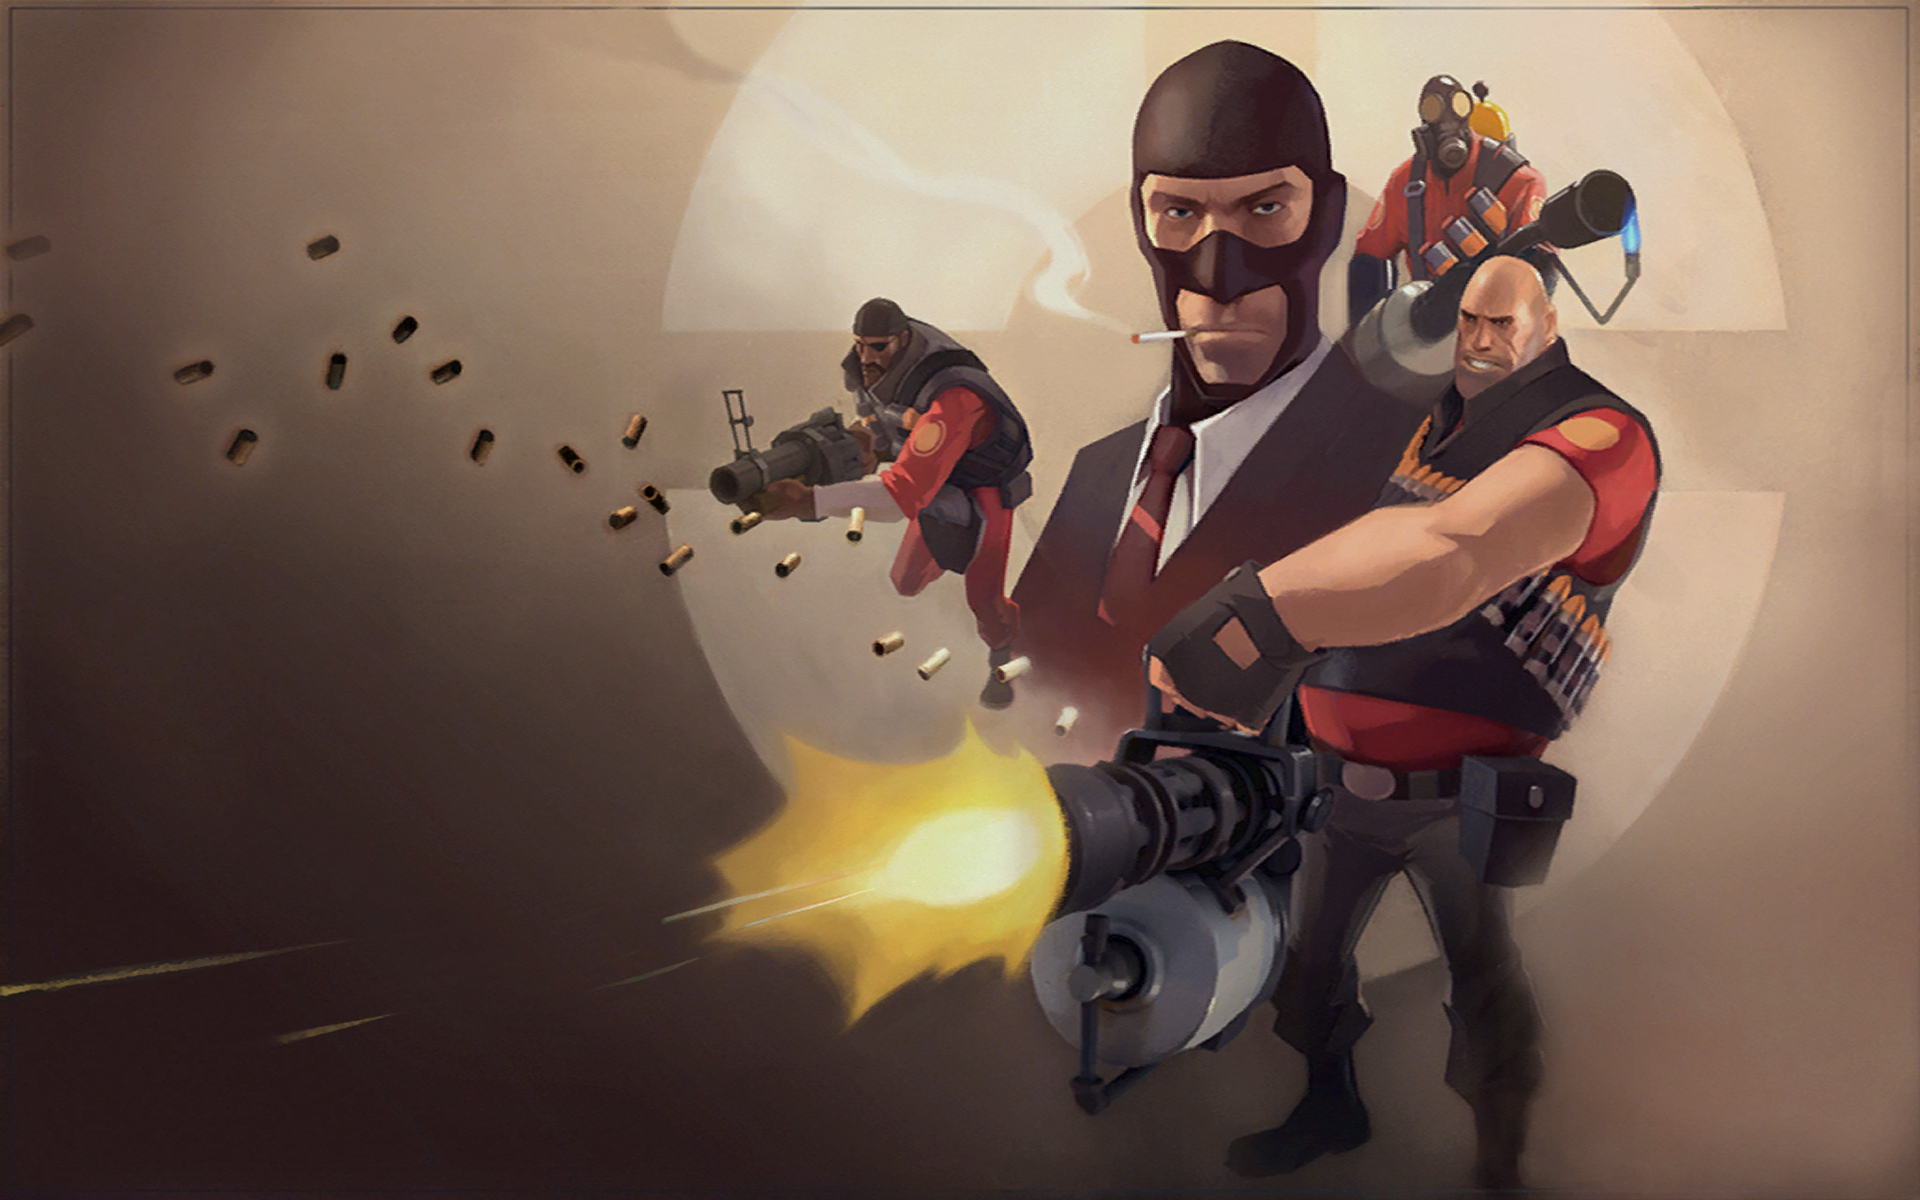 Team Fortress characters, including Spy, Pyro, Heavy, and Soldier, in a HD desktop wallpaper.